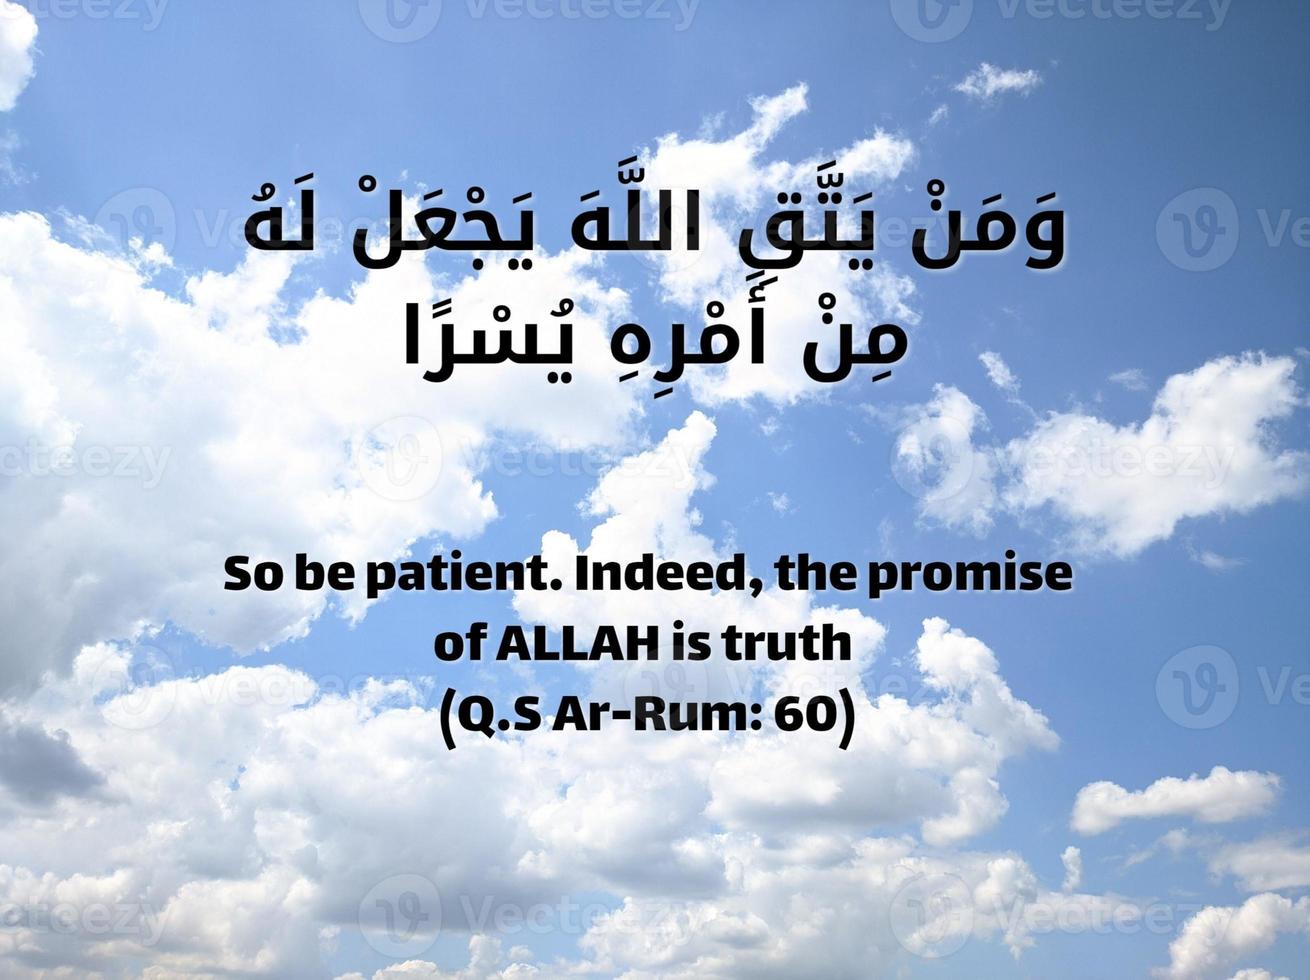 image of quotes surah from Al quran photo